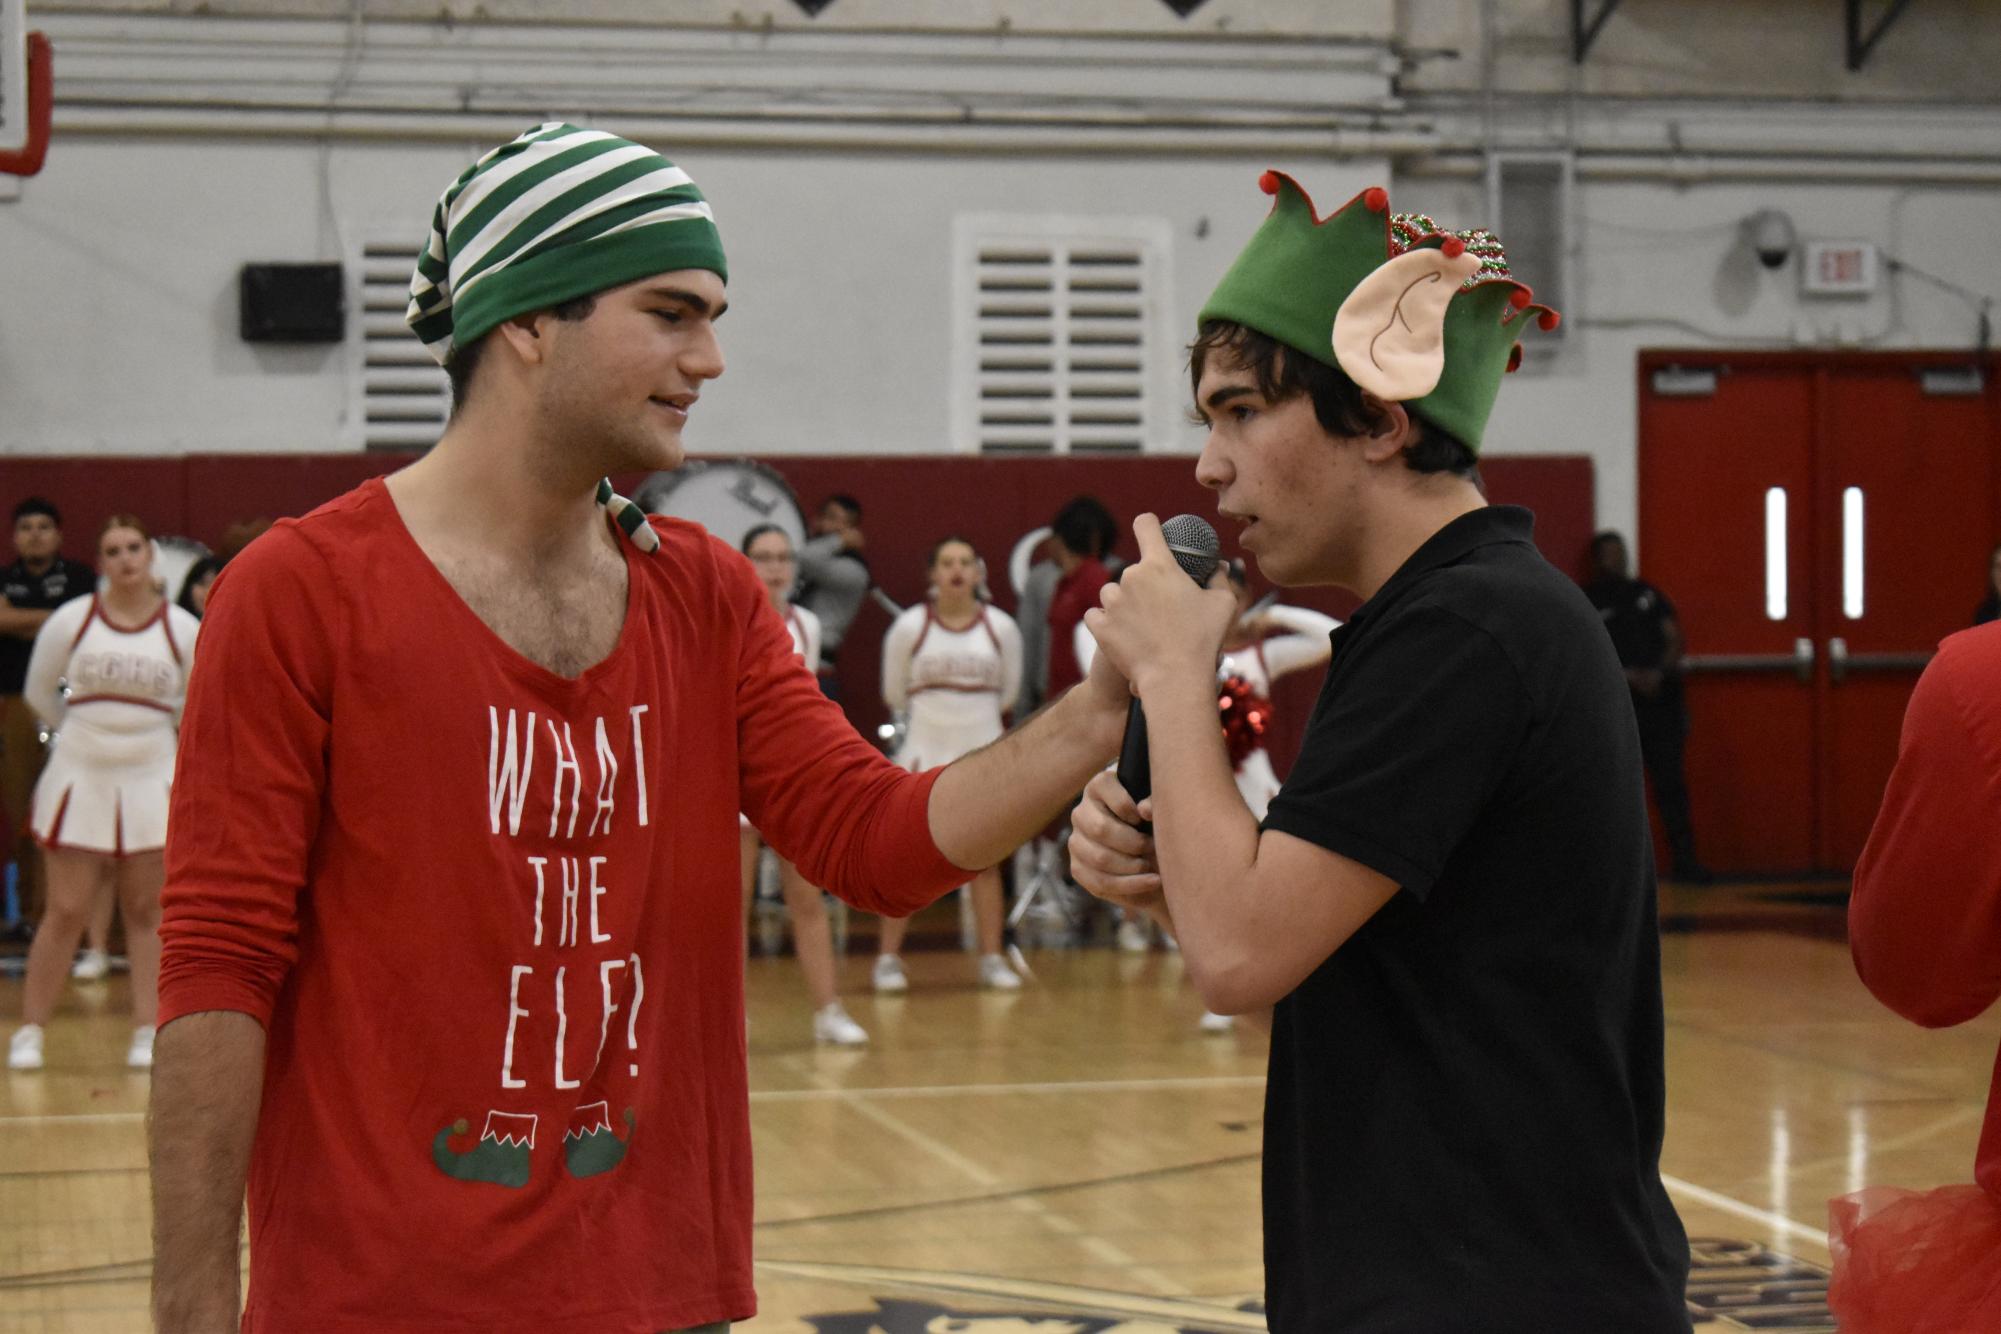 Students+Show+Off+Their+Holiday+Spirit+at+The+Winter+Pep+Rally